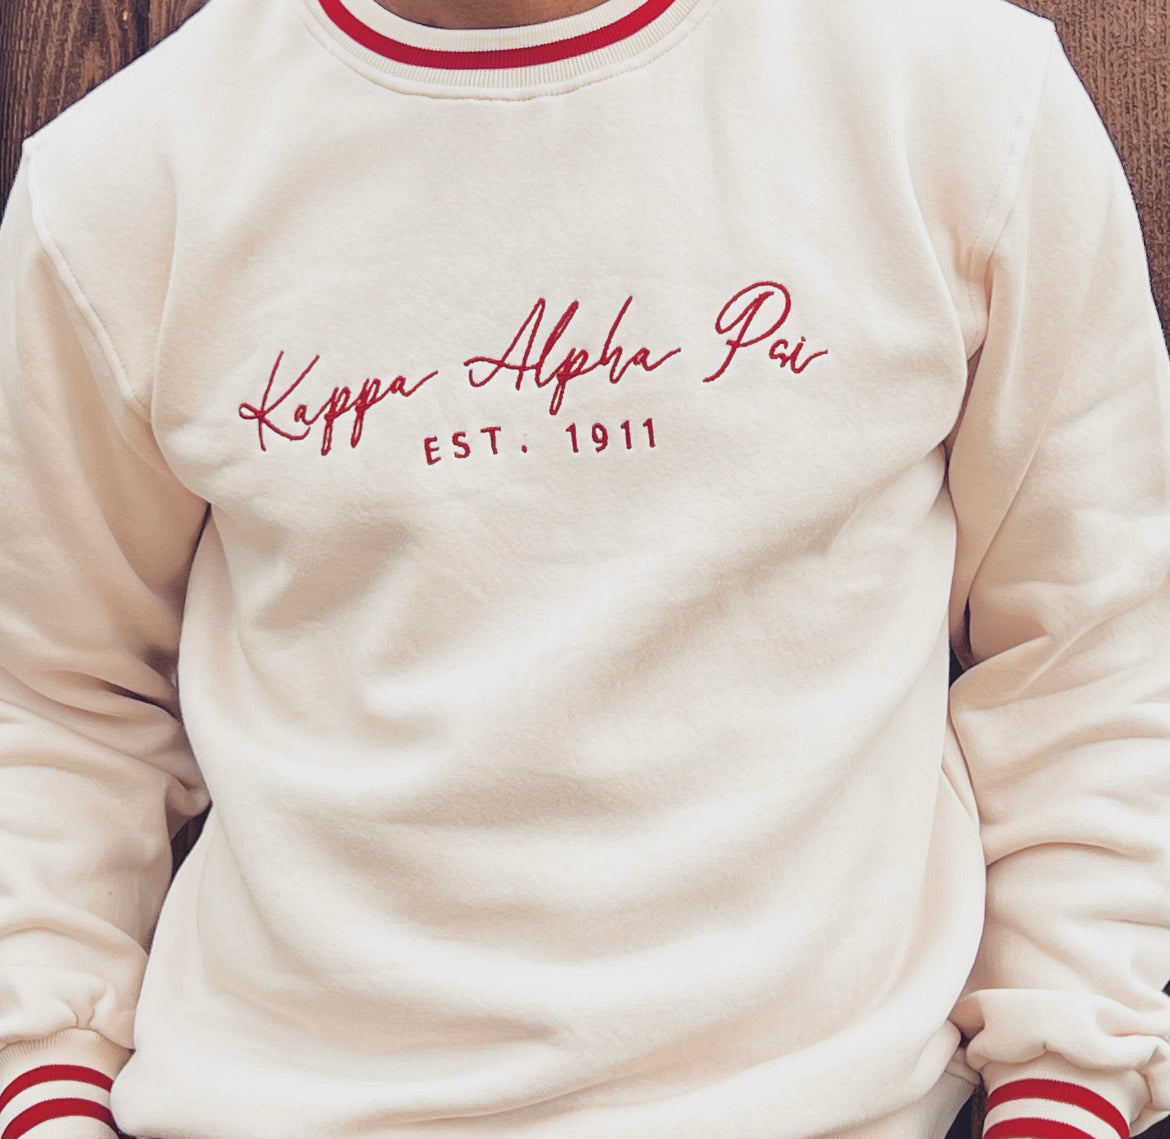 Exclusive Kappa Alpha Psi Well Stitched Appliqué Embroidery Lettered Sweater. This is the perfect long-sleeved Sweater to wear while showing off your Kappa Alpha Psi fraternity lettering. A comfortable 100% cotton tee with a twill Greek letters embroidery across the chest give you the perfect fit. This sweater is also a perfect gift for your favorite Kappa Man.